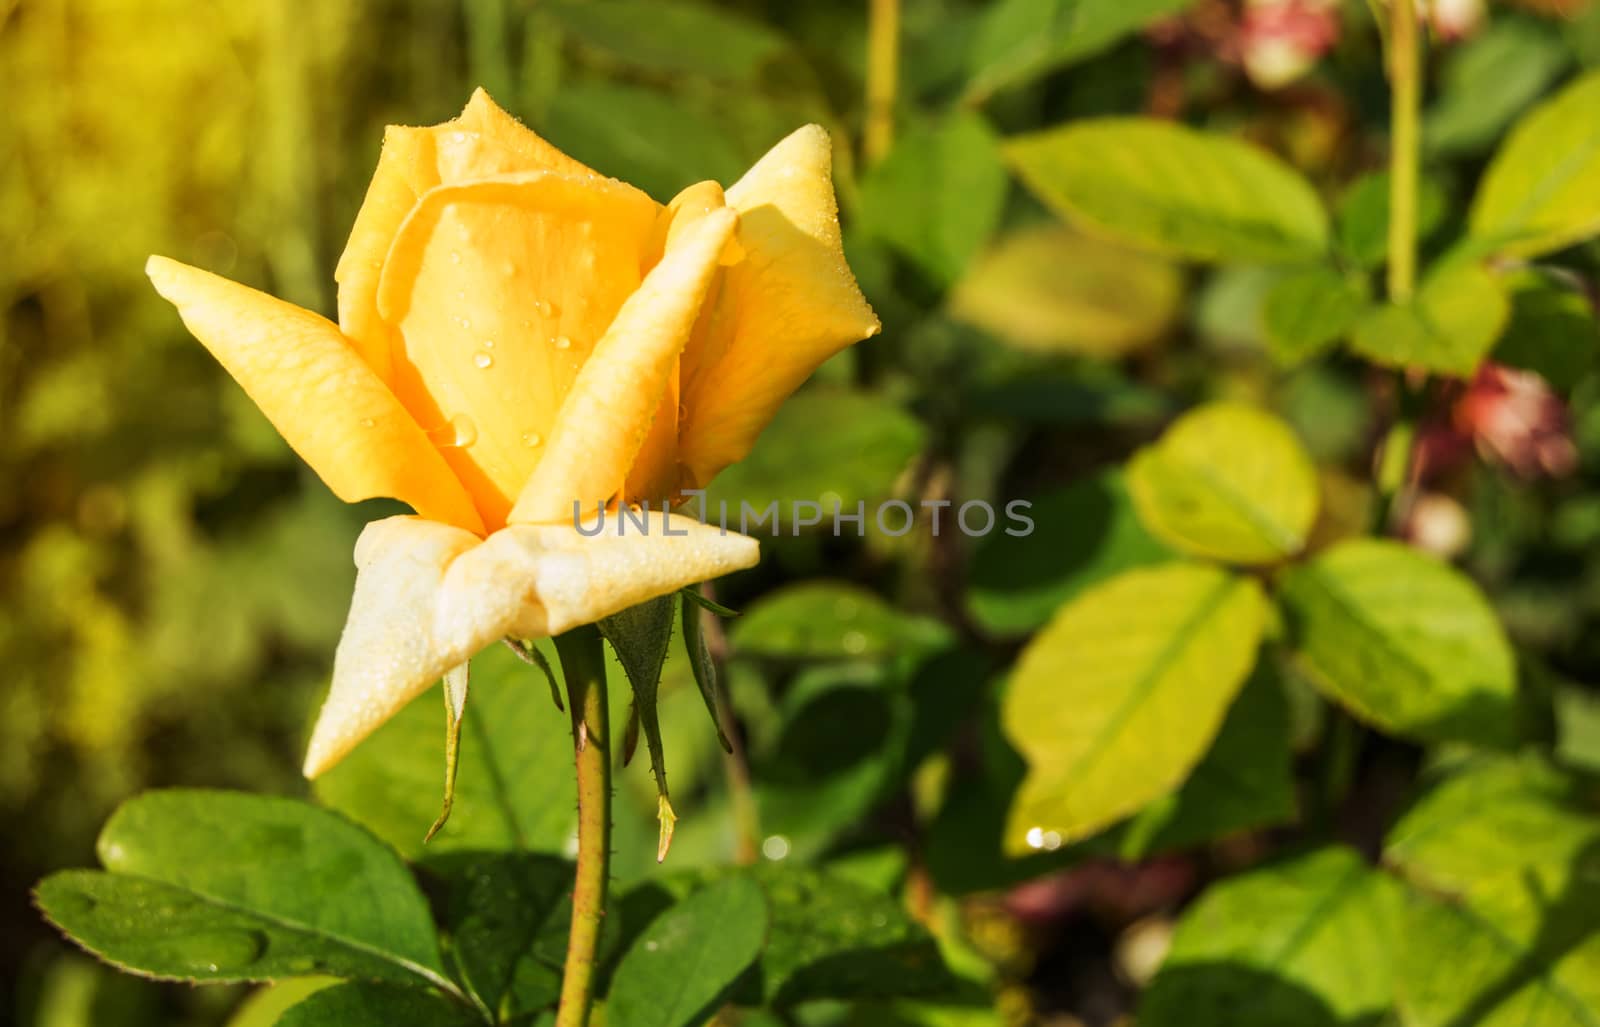 Beautiful yellow rose blooms in the garden background of green leaves and stems, the concept of postcards.